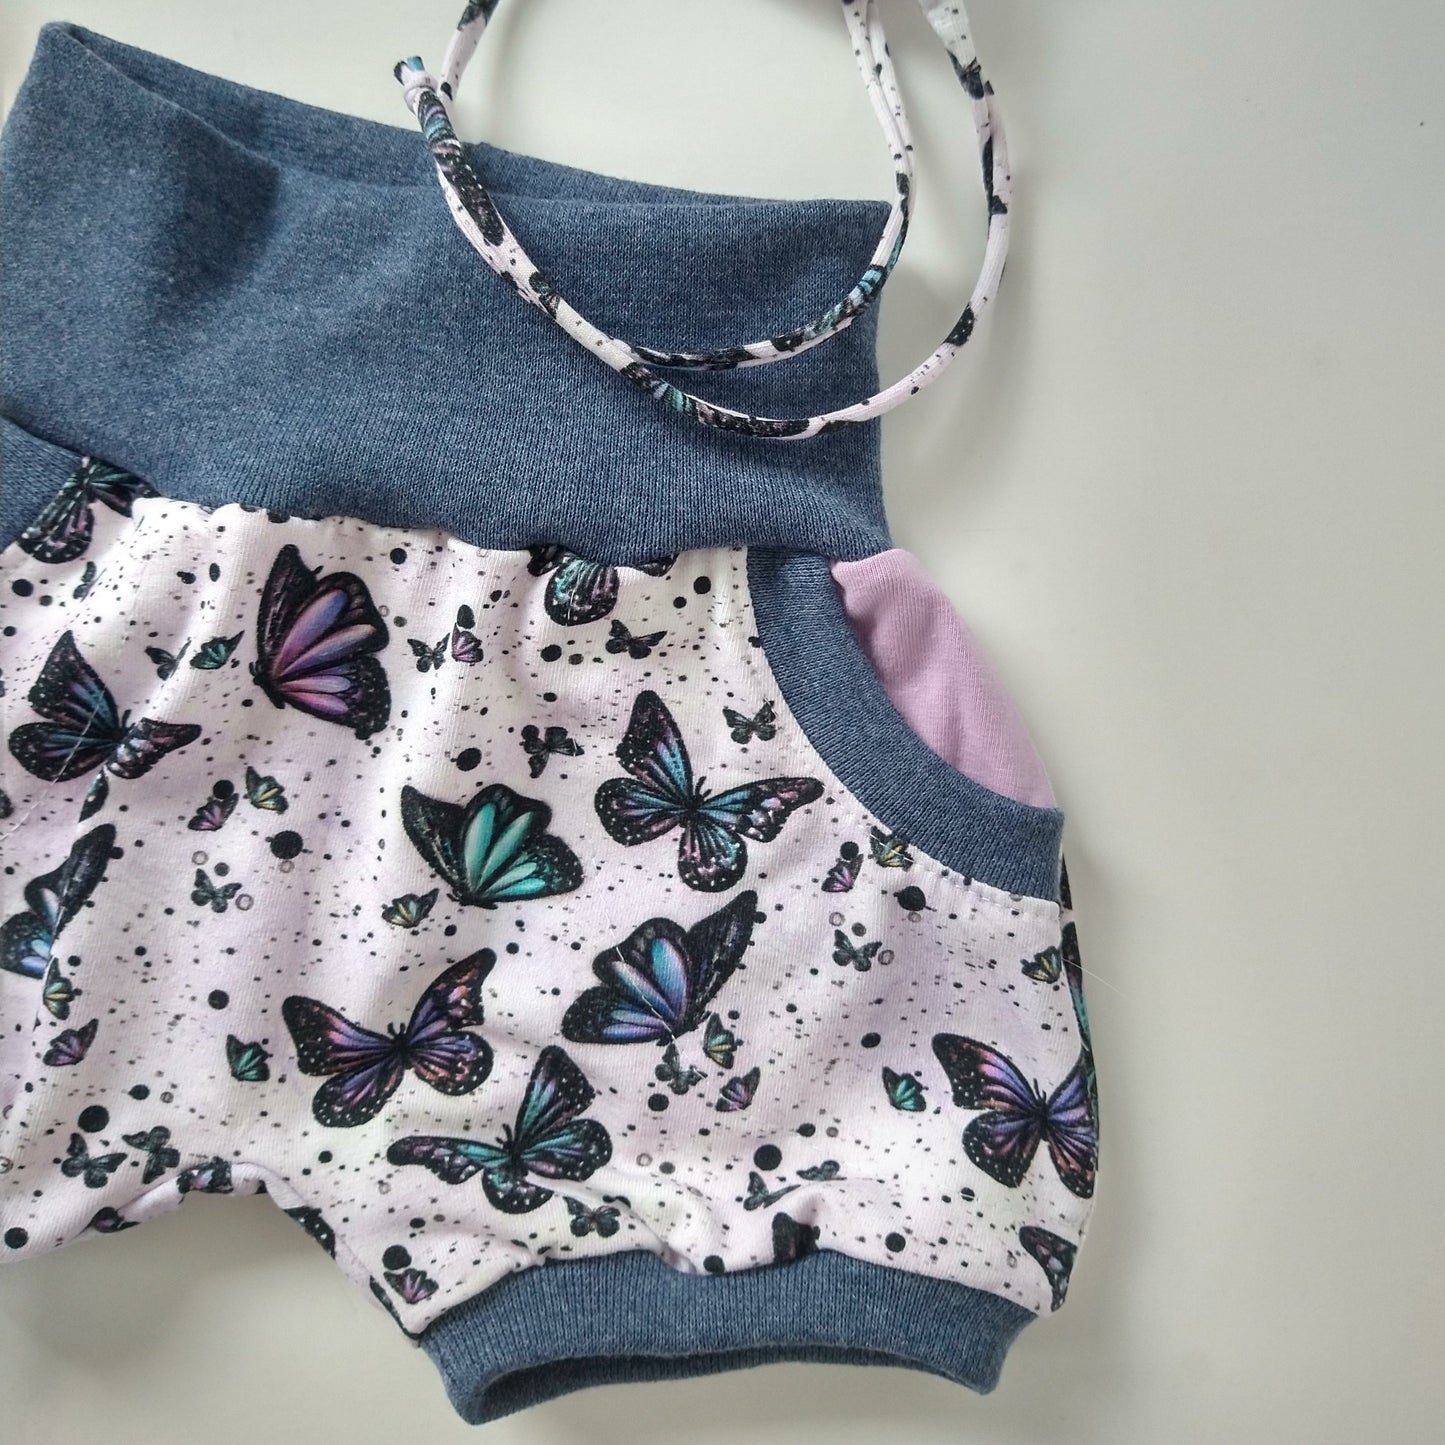 Baby summer shorts, size EUR 62 cm / US 2-4 months, purple butterfly mix and match (Handmade in Canada)